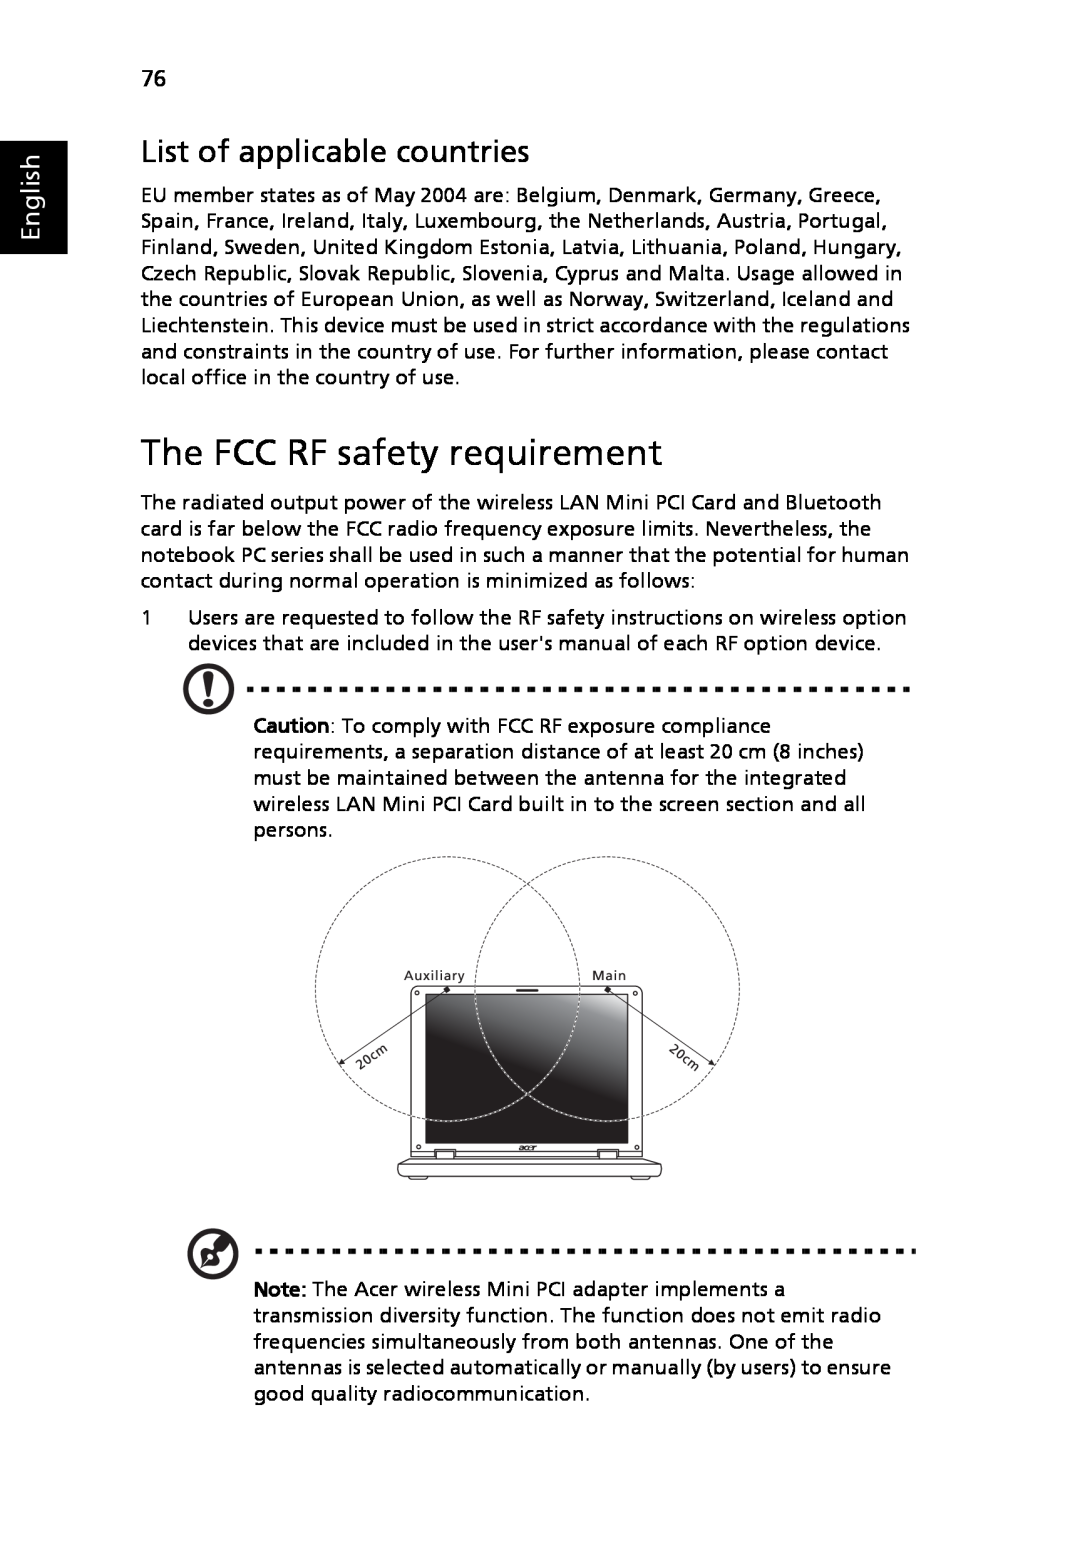 Acer 3030 Series, 3040 Series manual The FCC RF safety requirement, List of applicable countries, English 